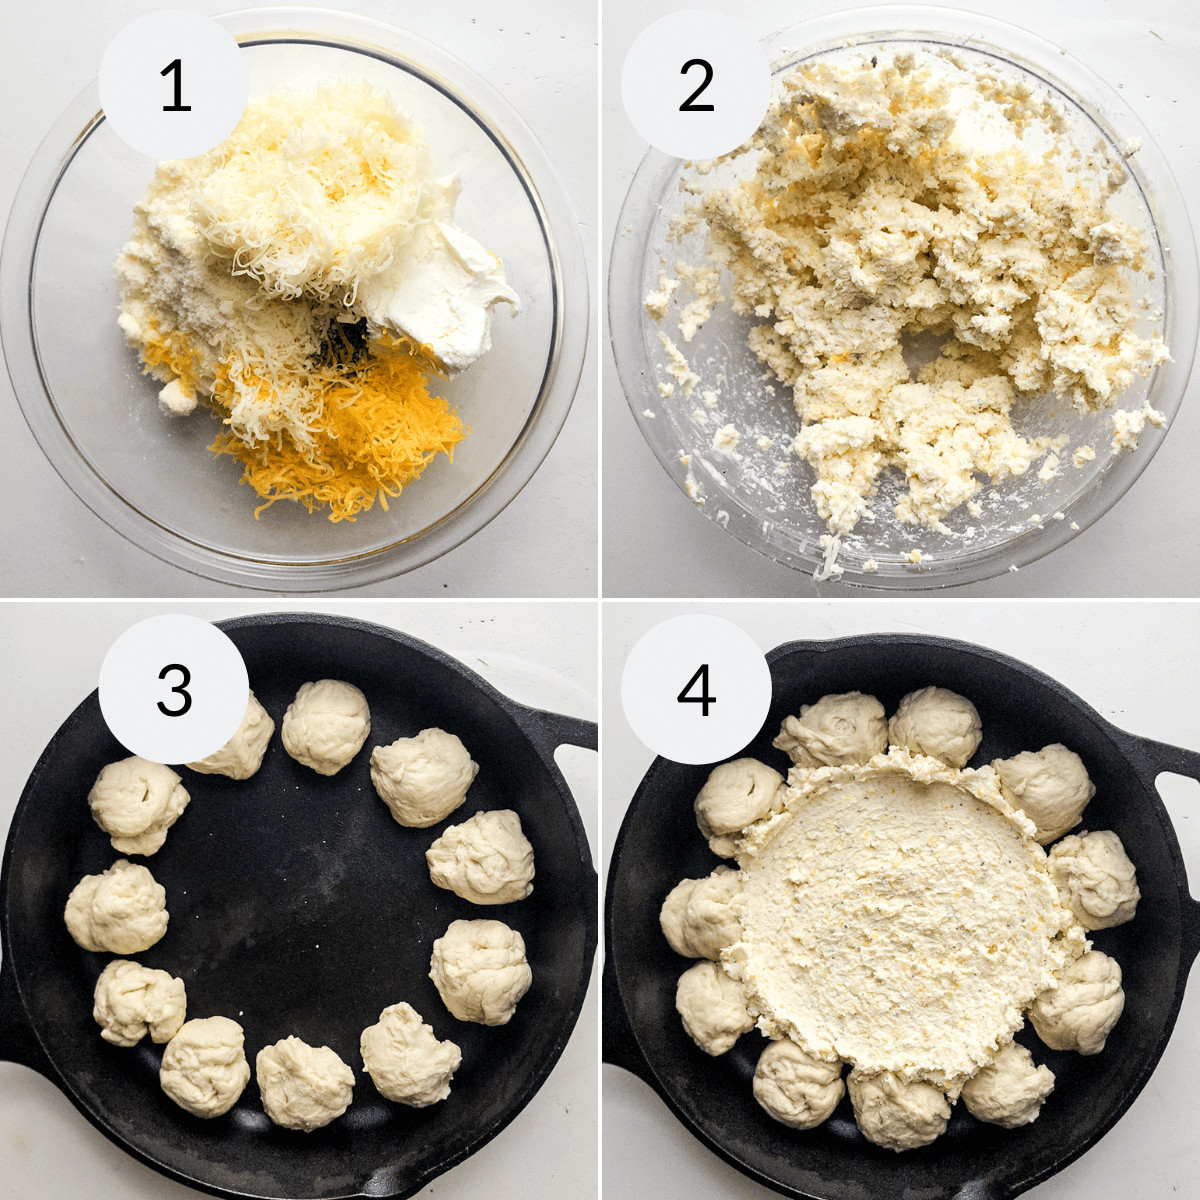 Four-step process of making a dish: 1) ingredients combined in a bowl, 2) mixed into a crumbly texture, 3) dough portioned into balls in a